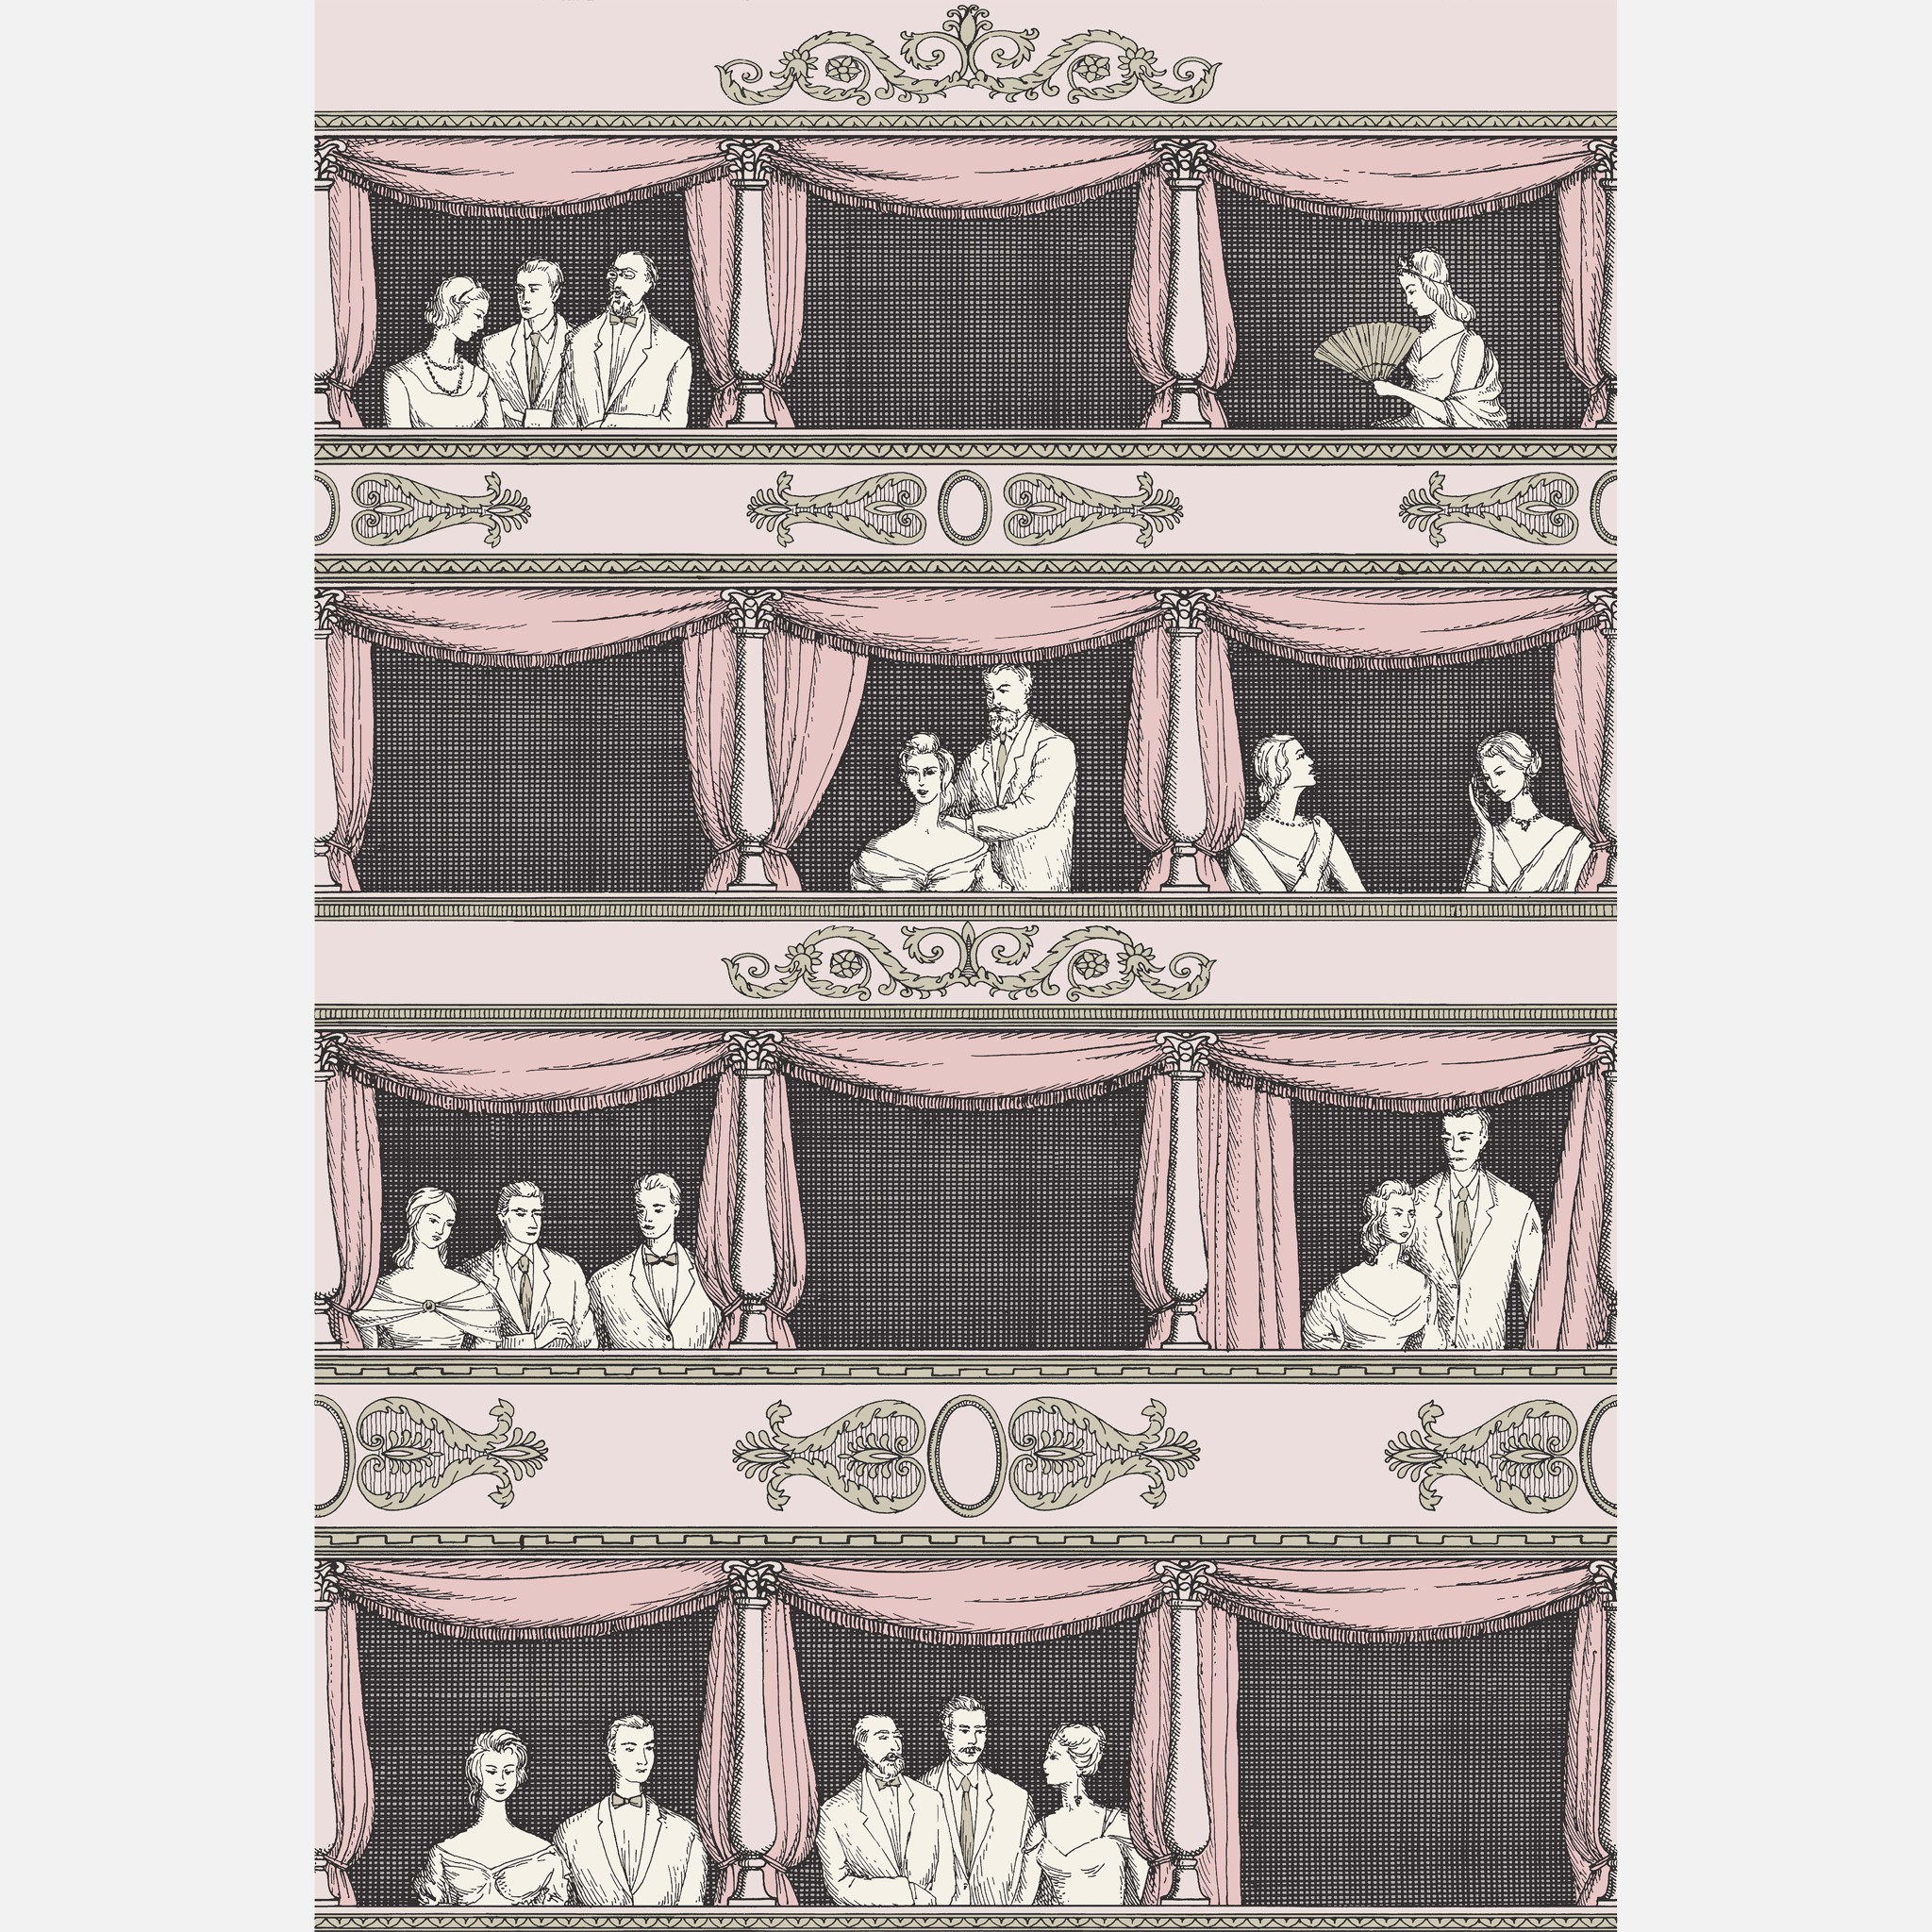 a drawing of people sitting on a stage